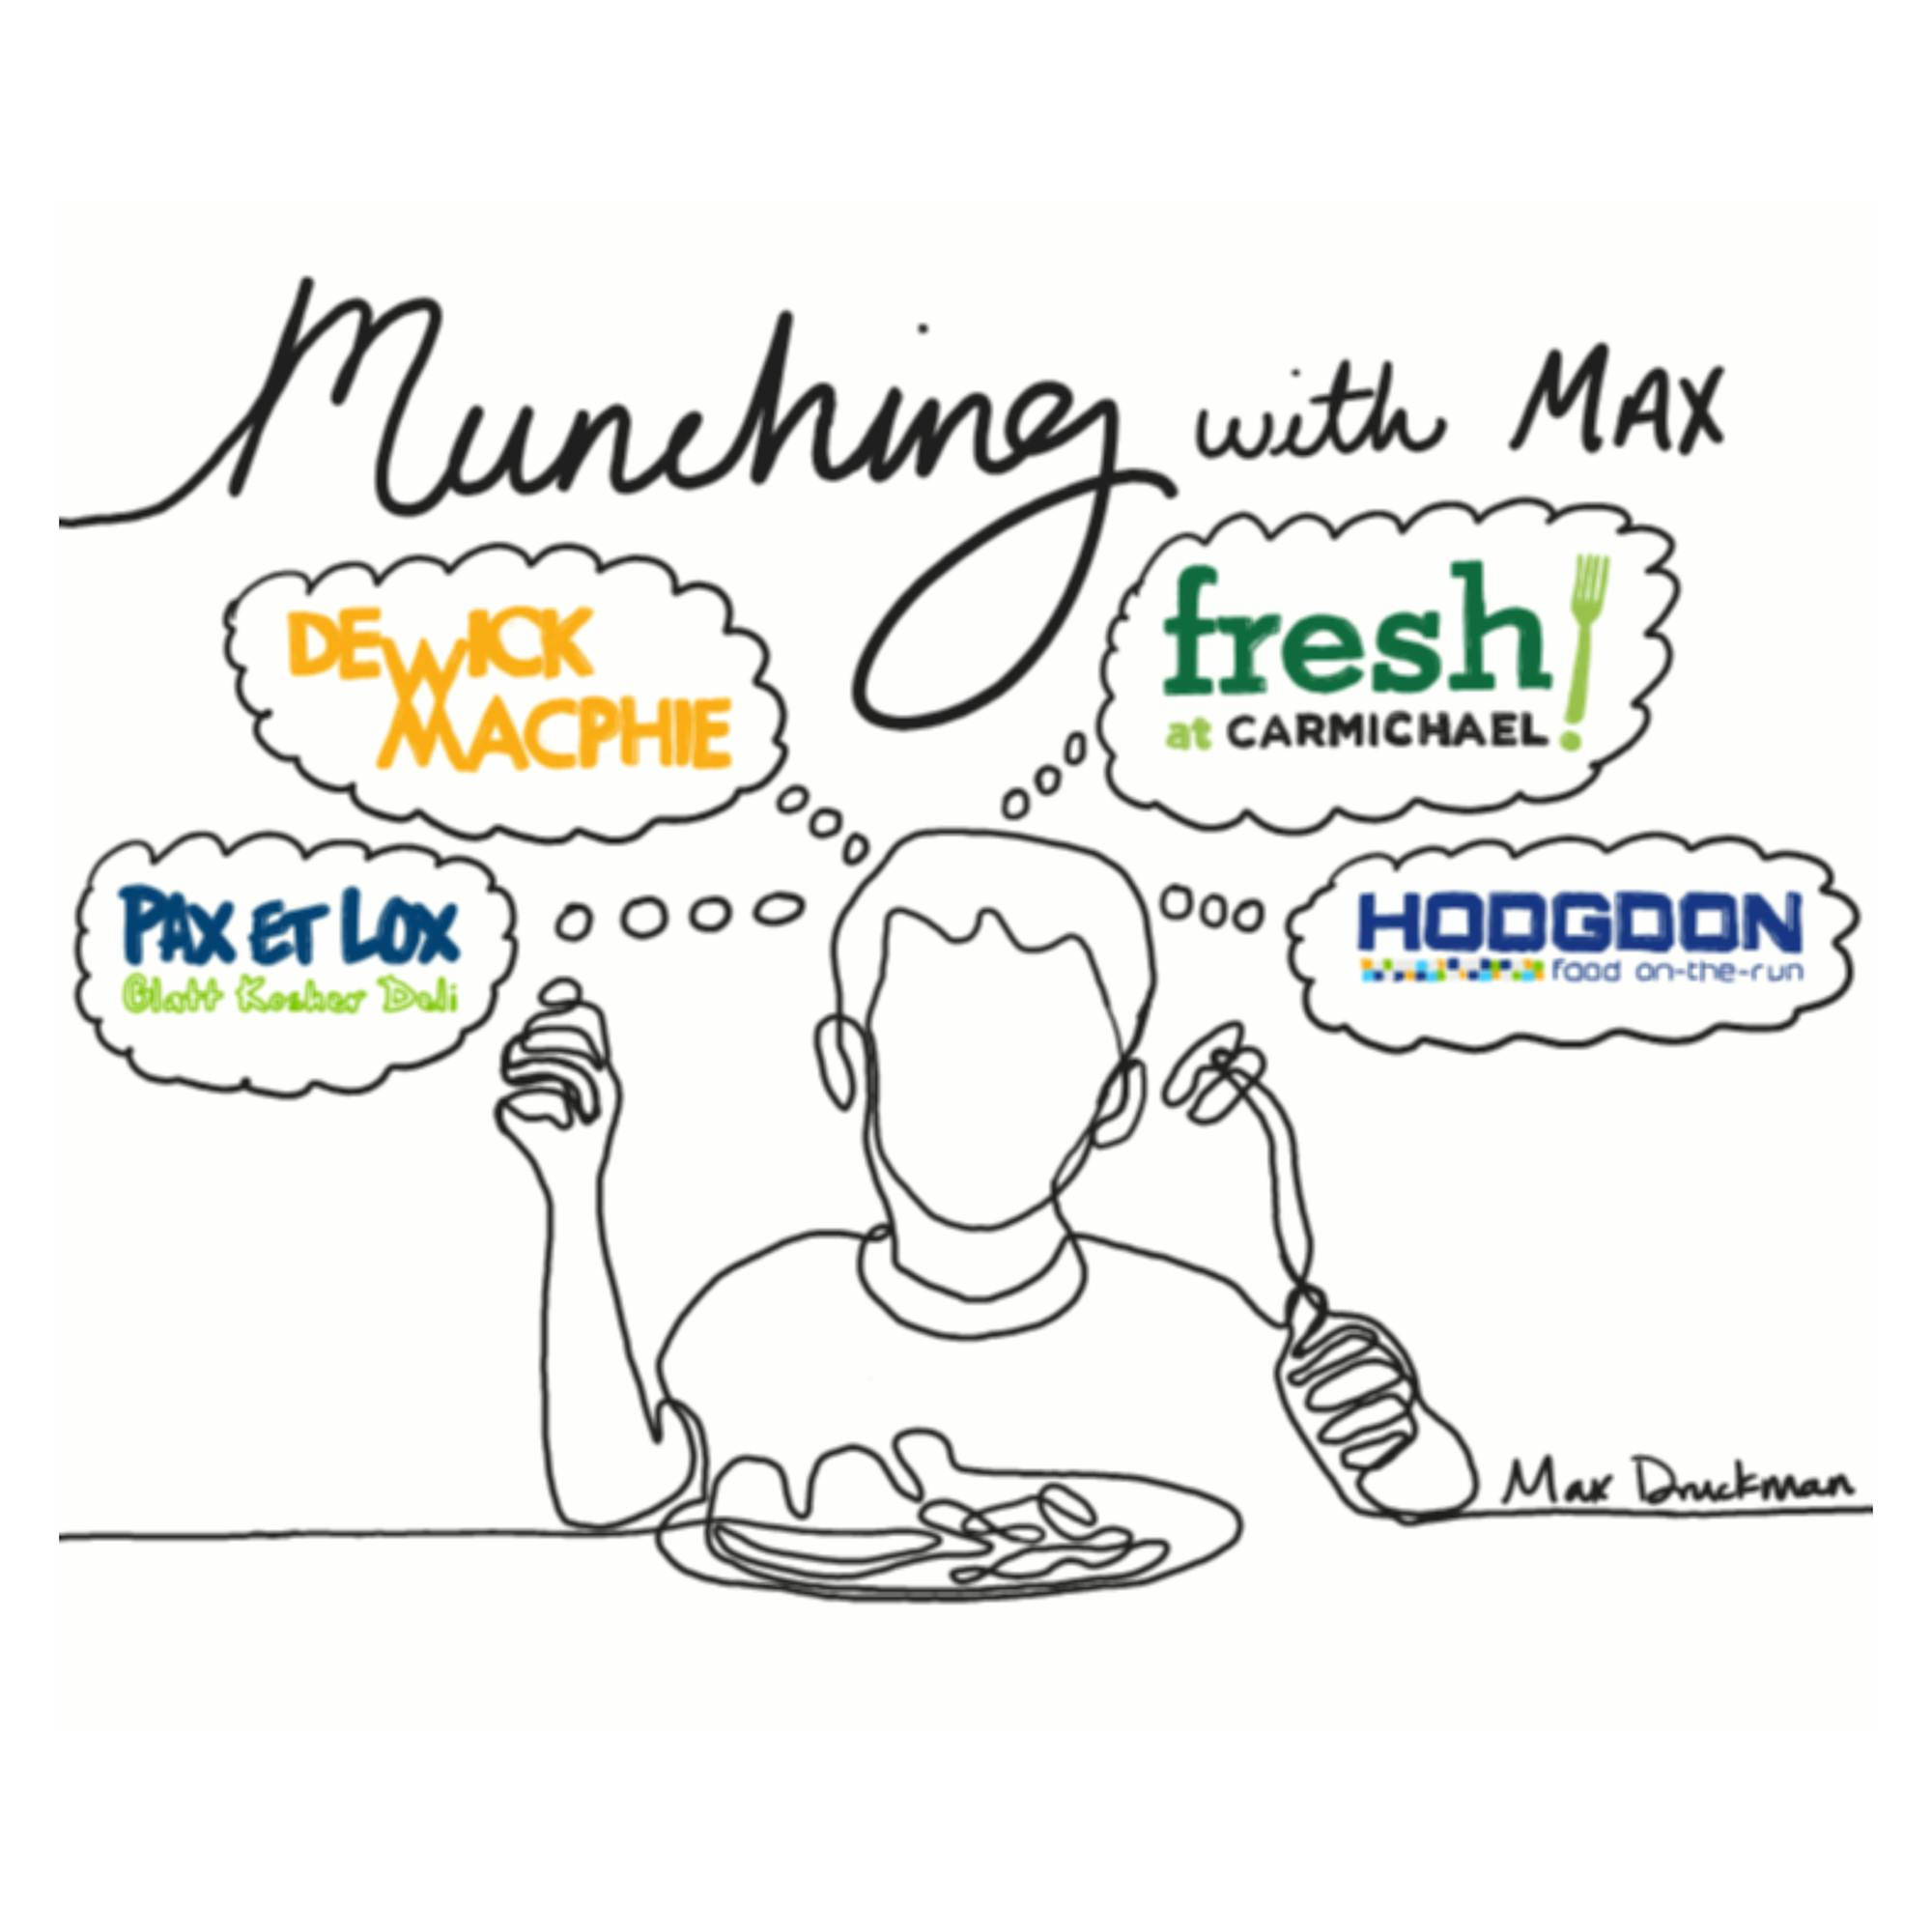 Munching with Max: Lunch at Hodge - The Tufts Daily